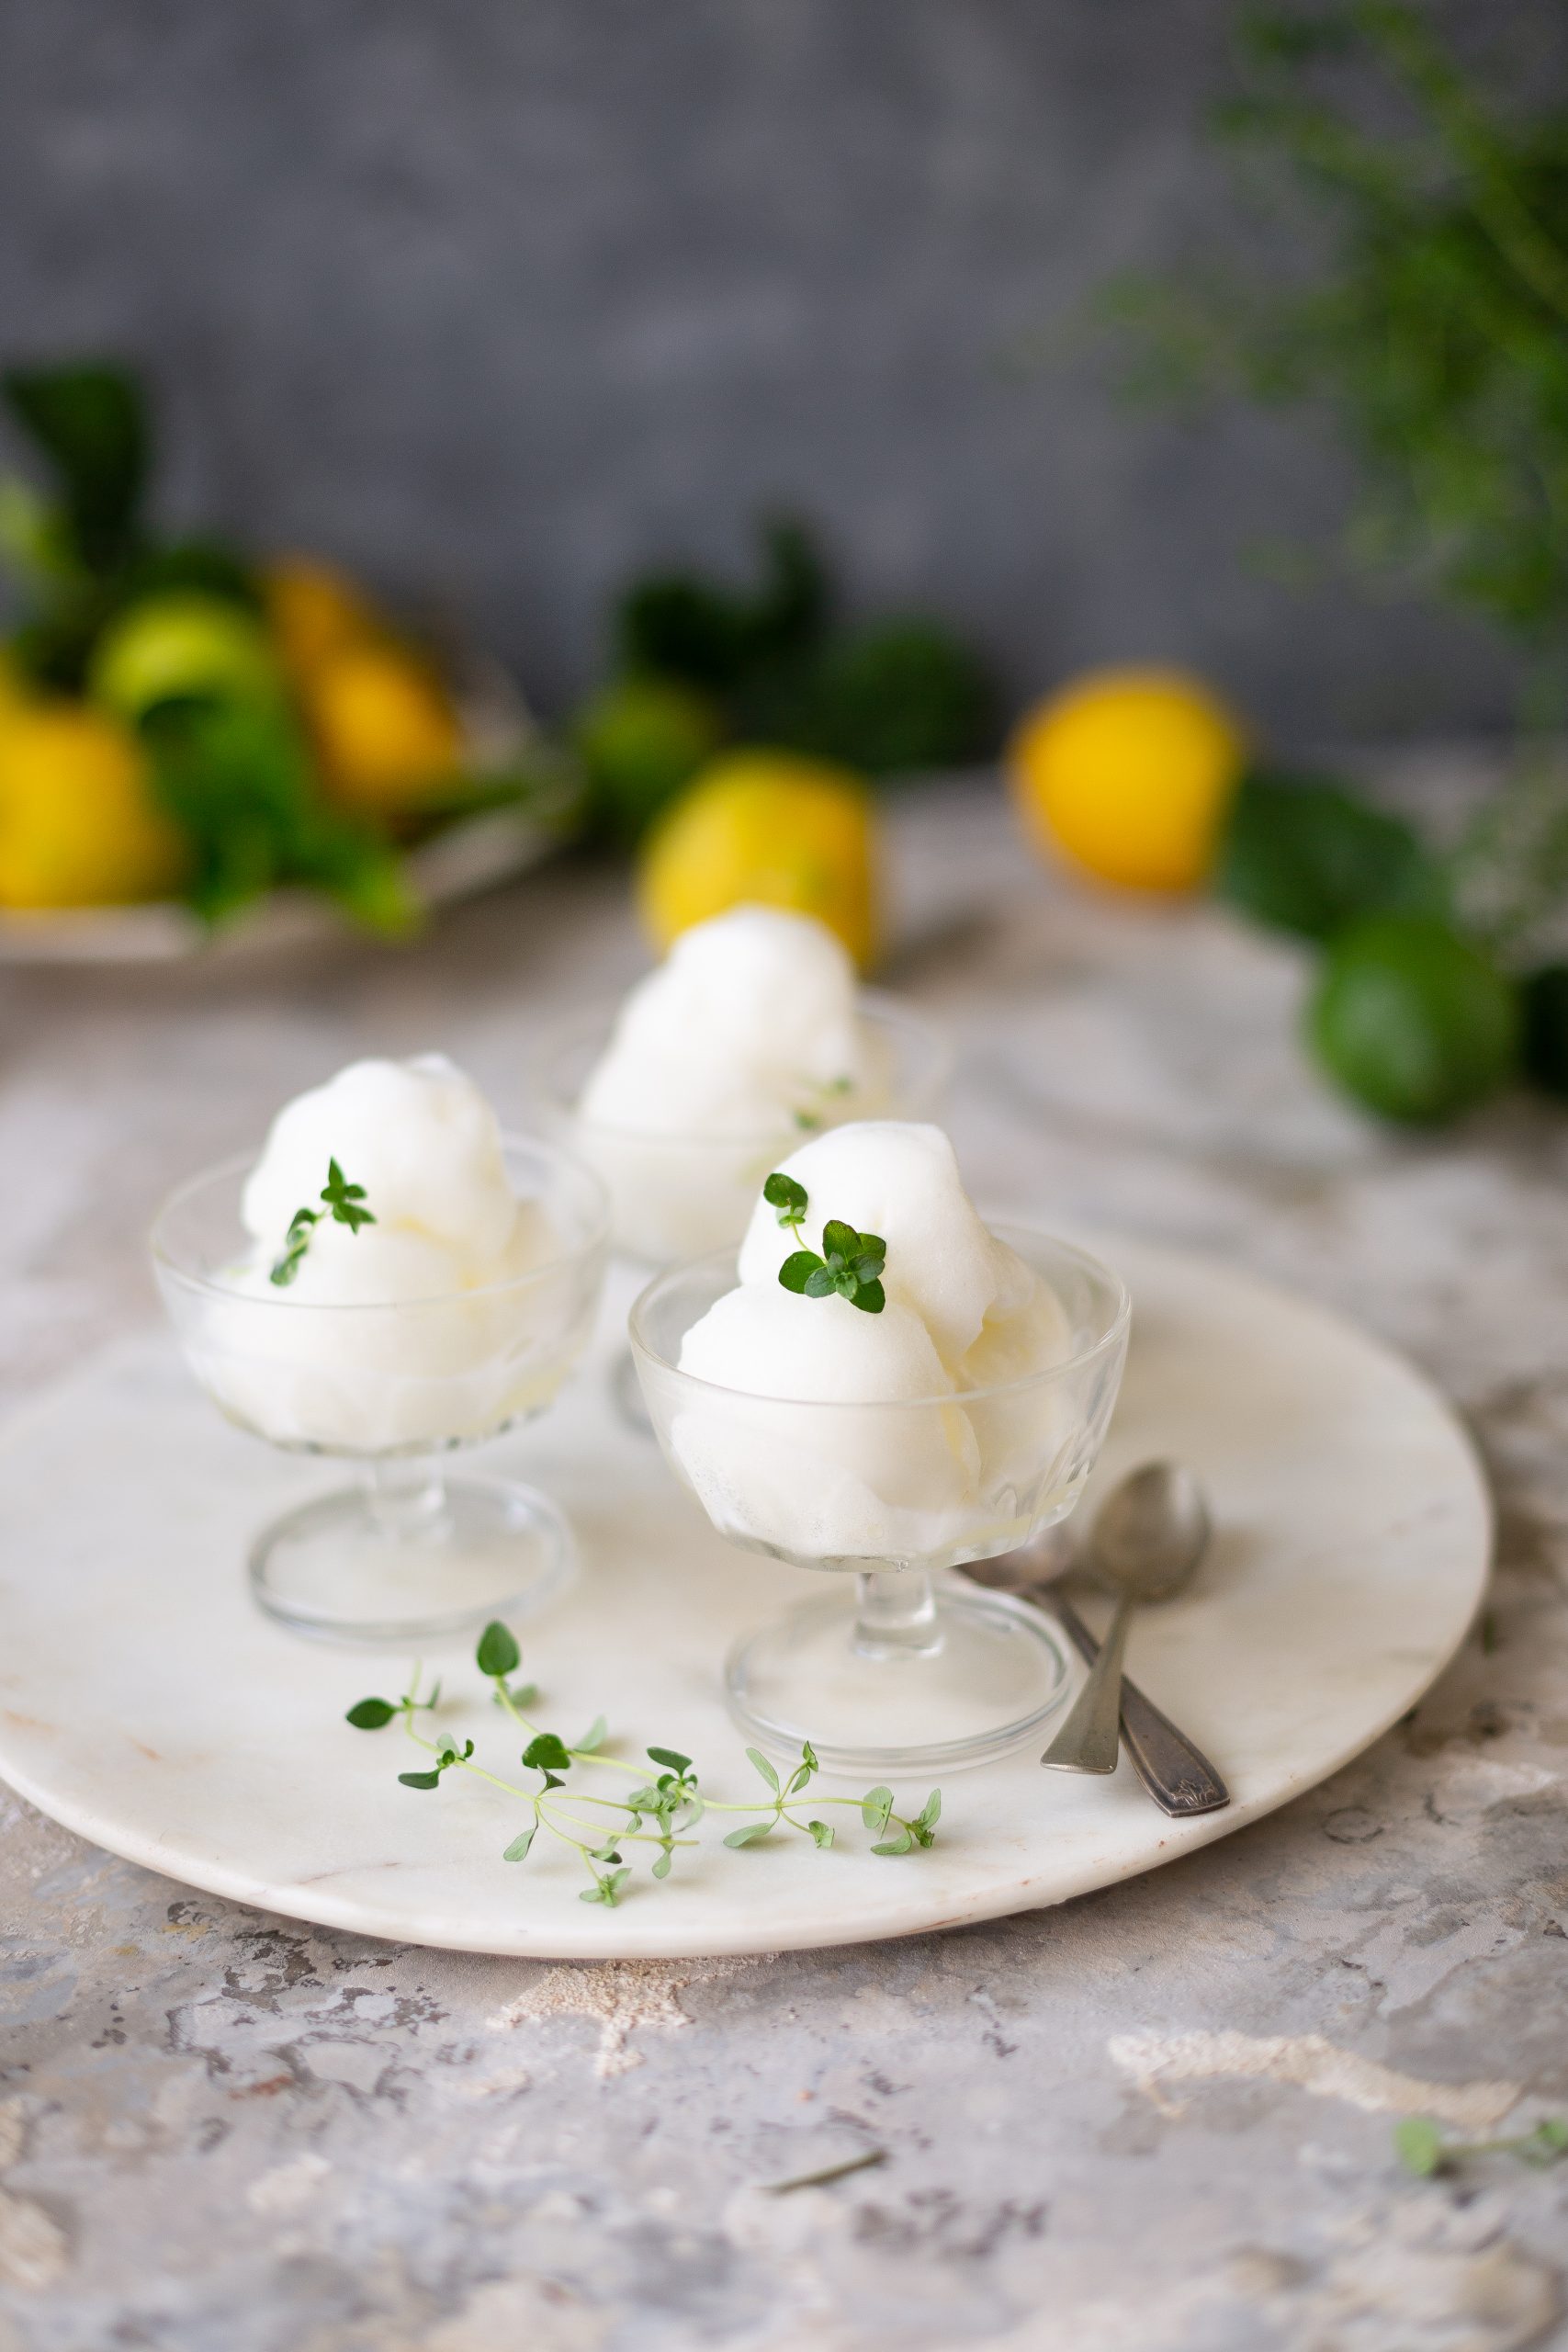 Lemon sorbet infused with thyme